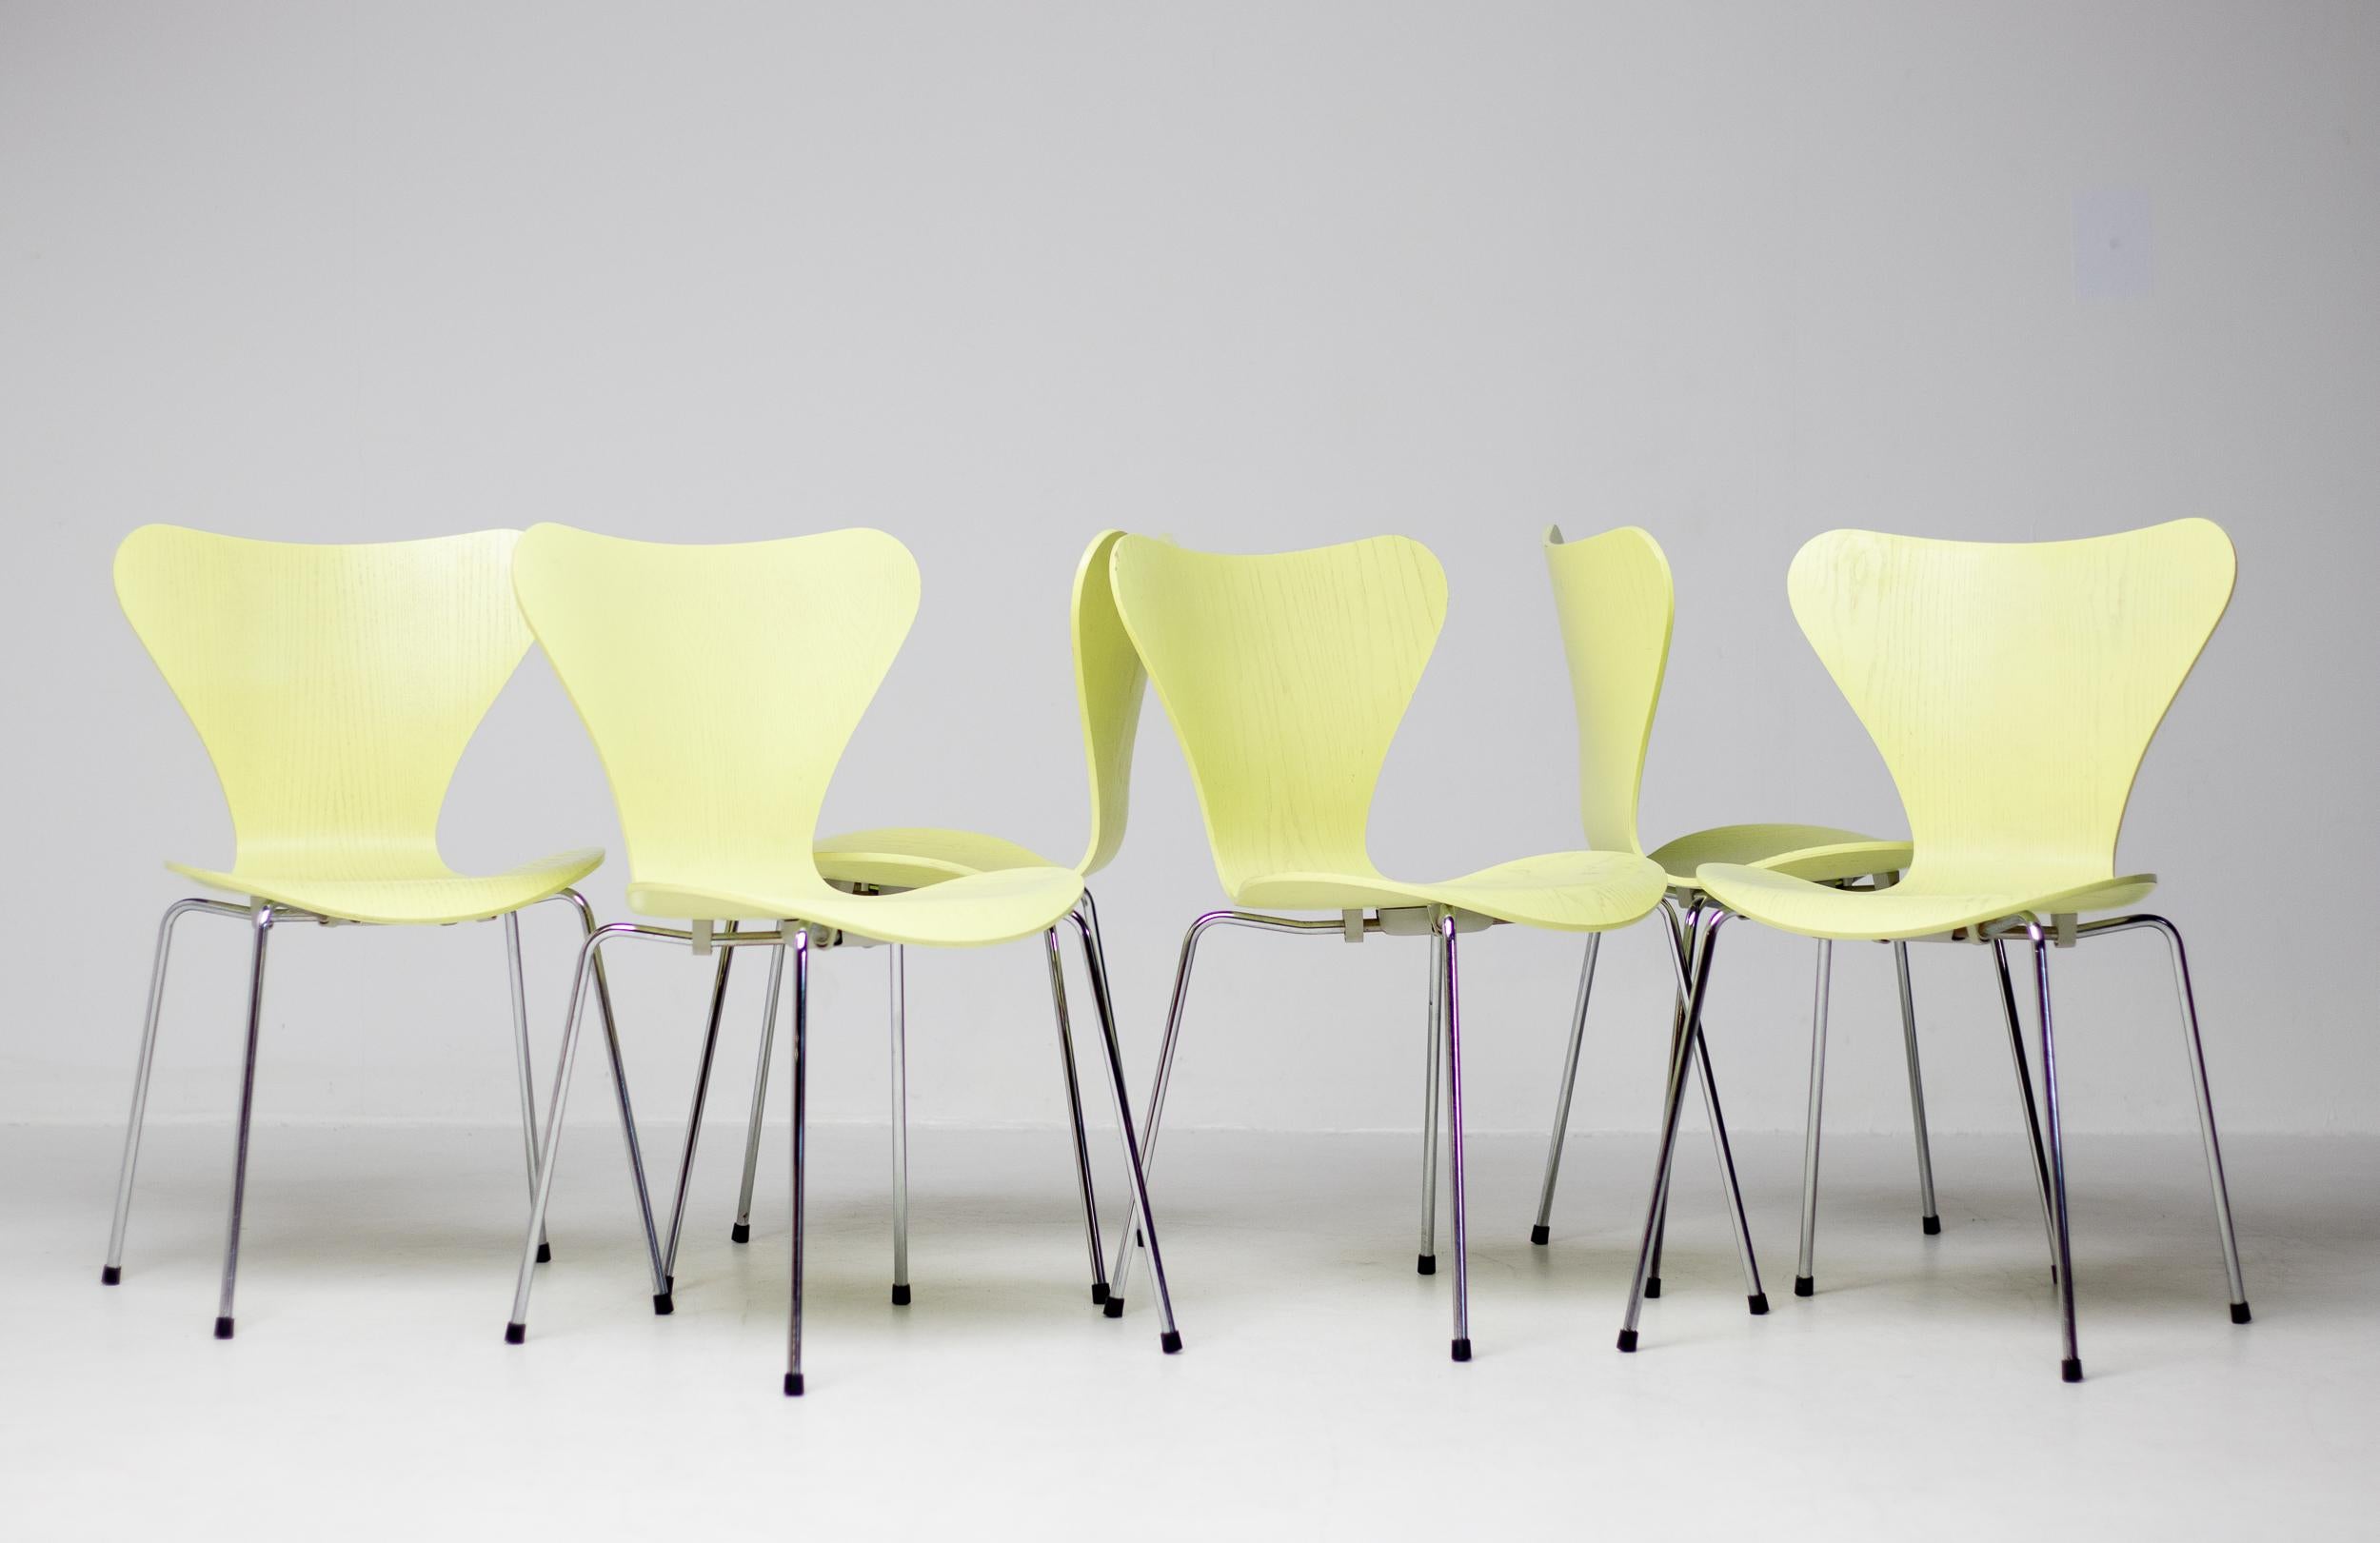 This set of 6 Model 3107, or series seven chairs, were designed by Arne Jacobsen and manufactured by Fritz Hansen. This wonderful set is finished in limited edition Lemon Lime dyed ash and made in 2005.
The Series 7™ designed by Arne Jacobsen is by